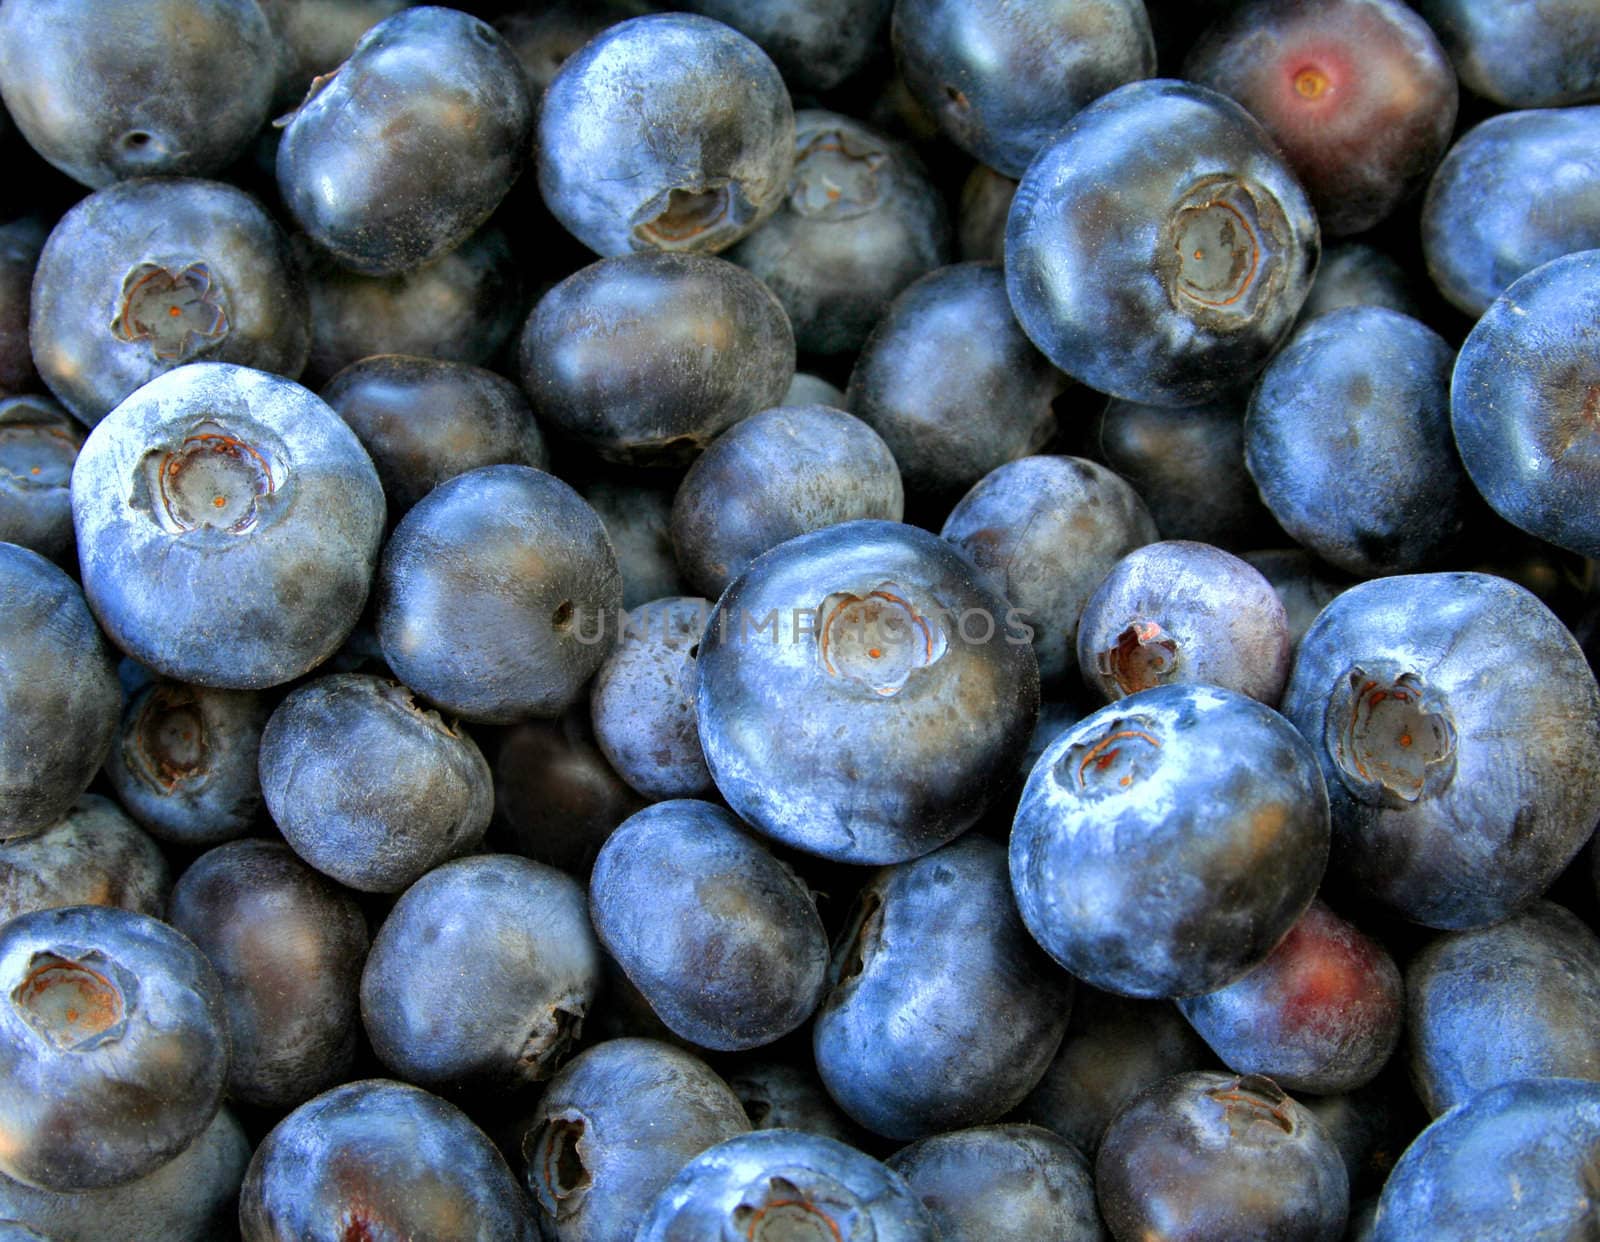 Blueberries in a pile making a great food background.